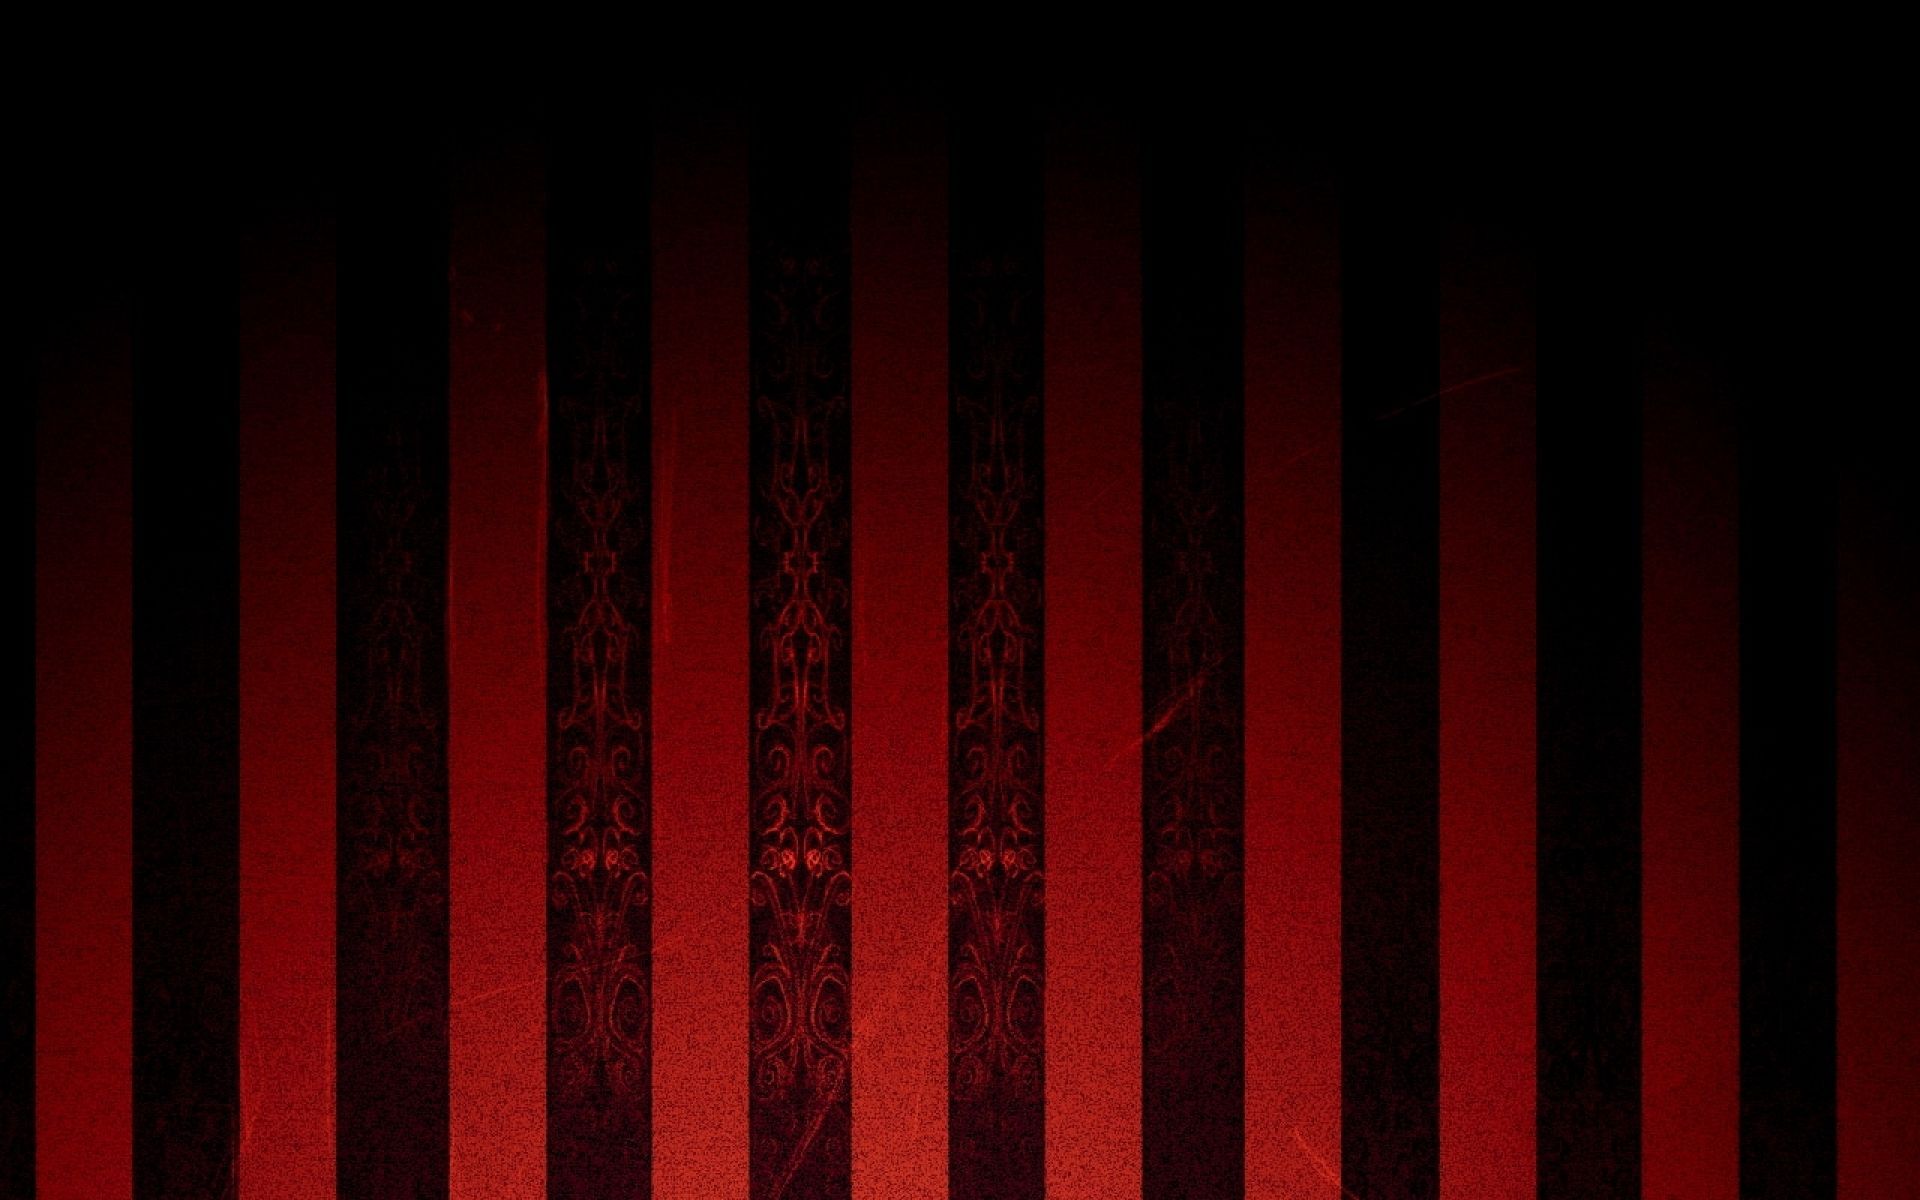 Gallery for - desktop wallpaper red and black